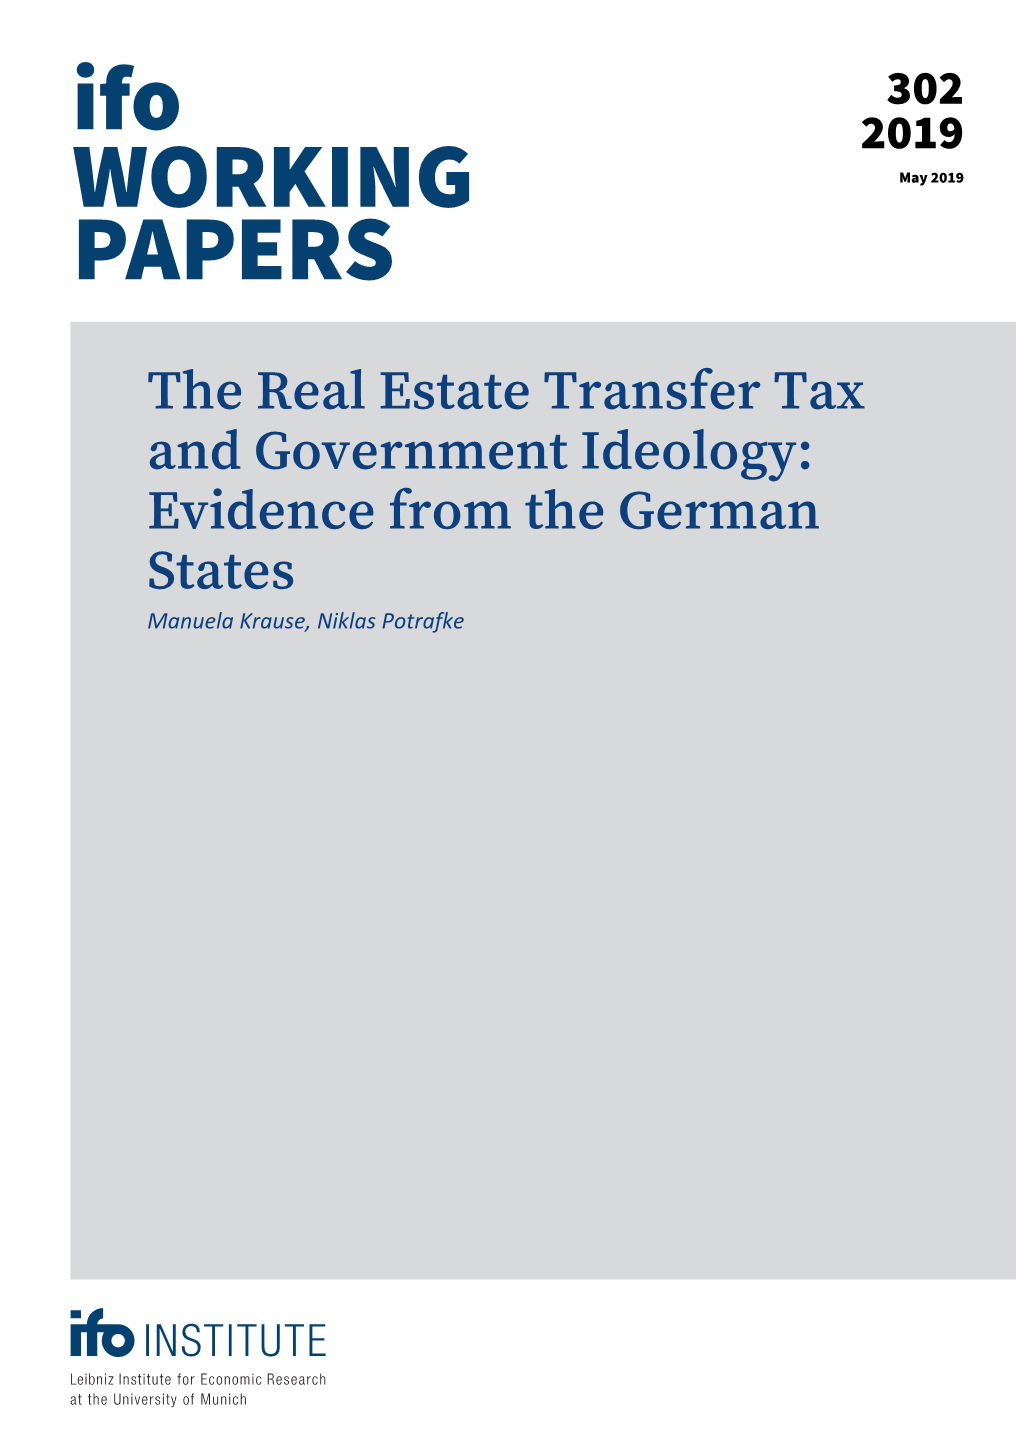 The Real Estate Transfer Tax and Government Ideology: Evidence from the German States